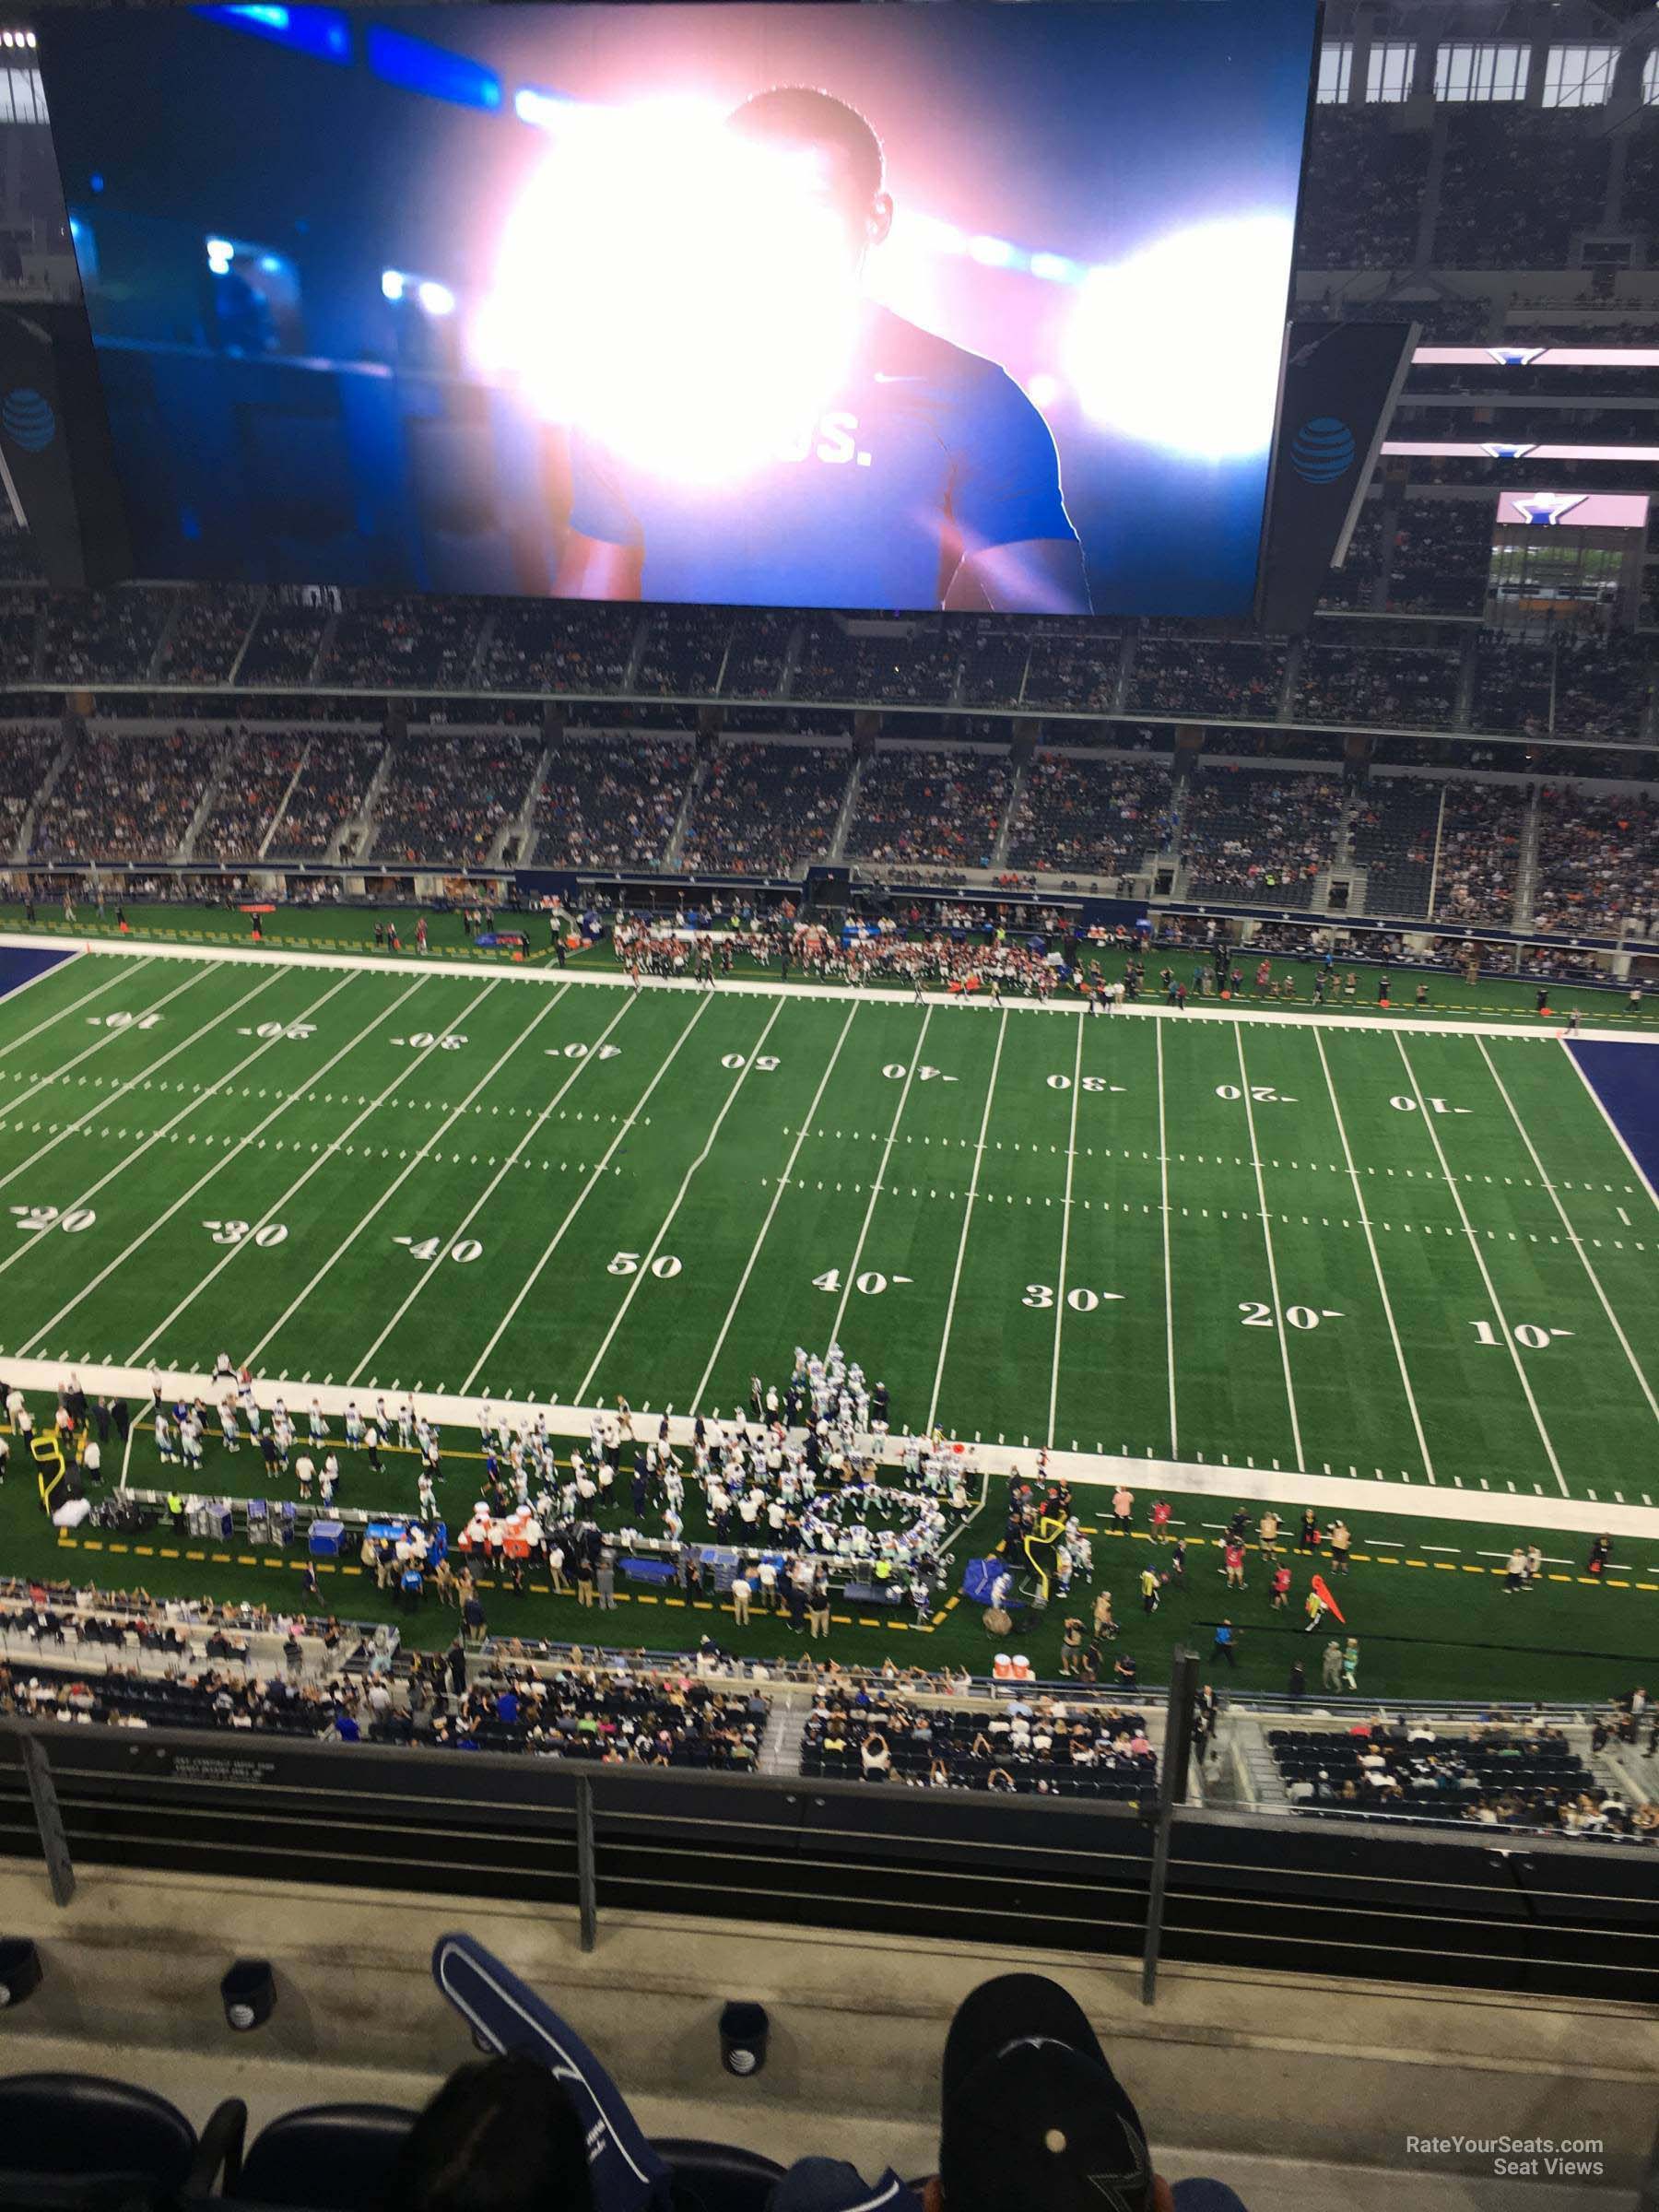 section 410, row 4 seat view  for football - at&t stadium (cowboys stadium)